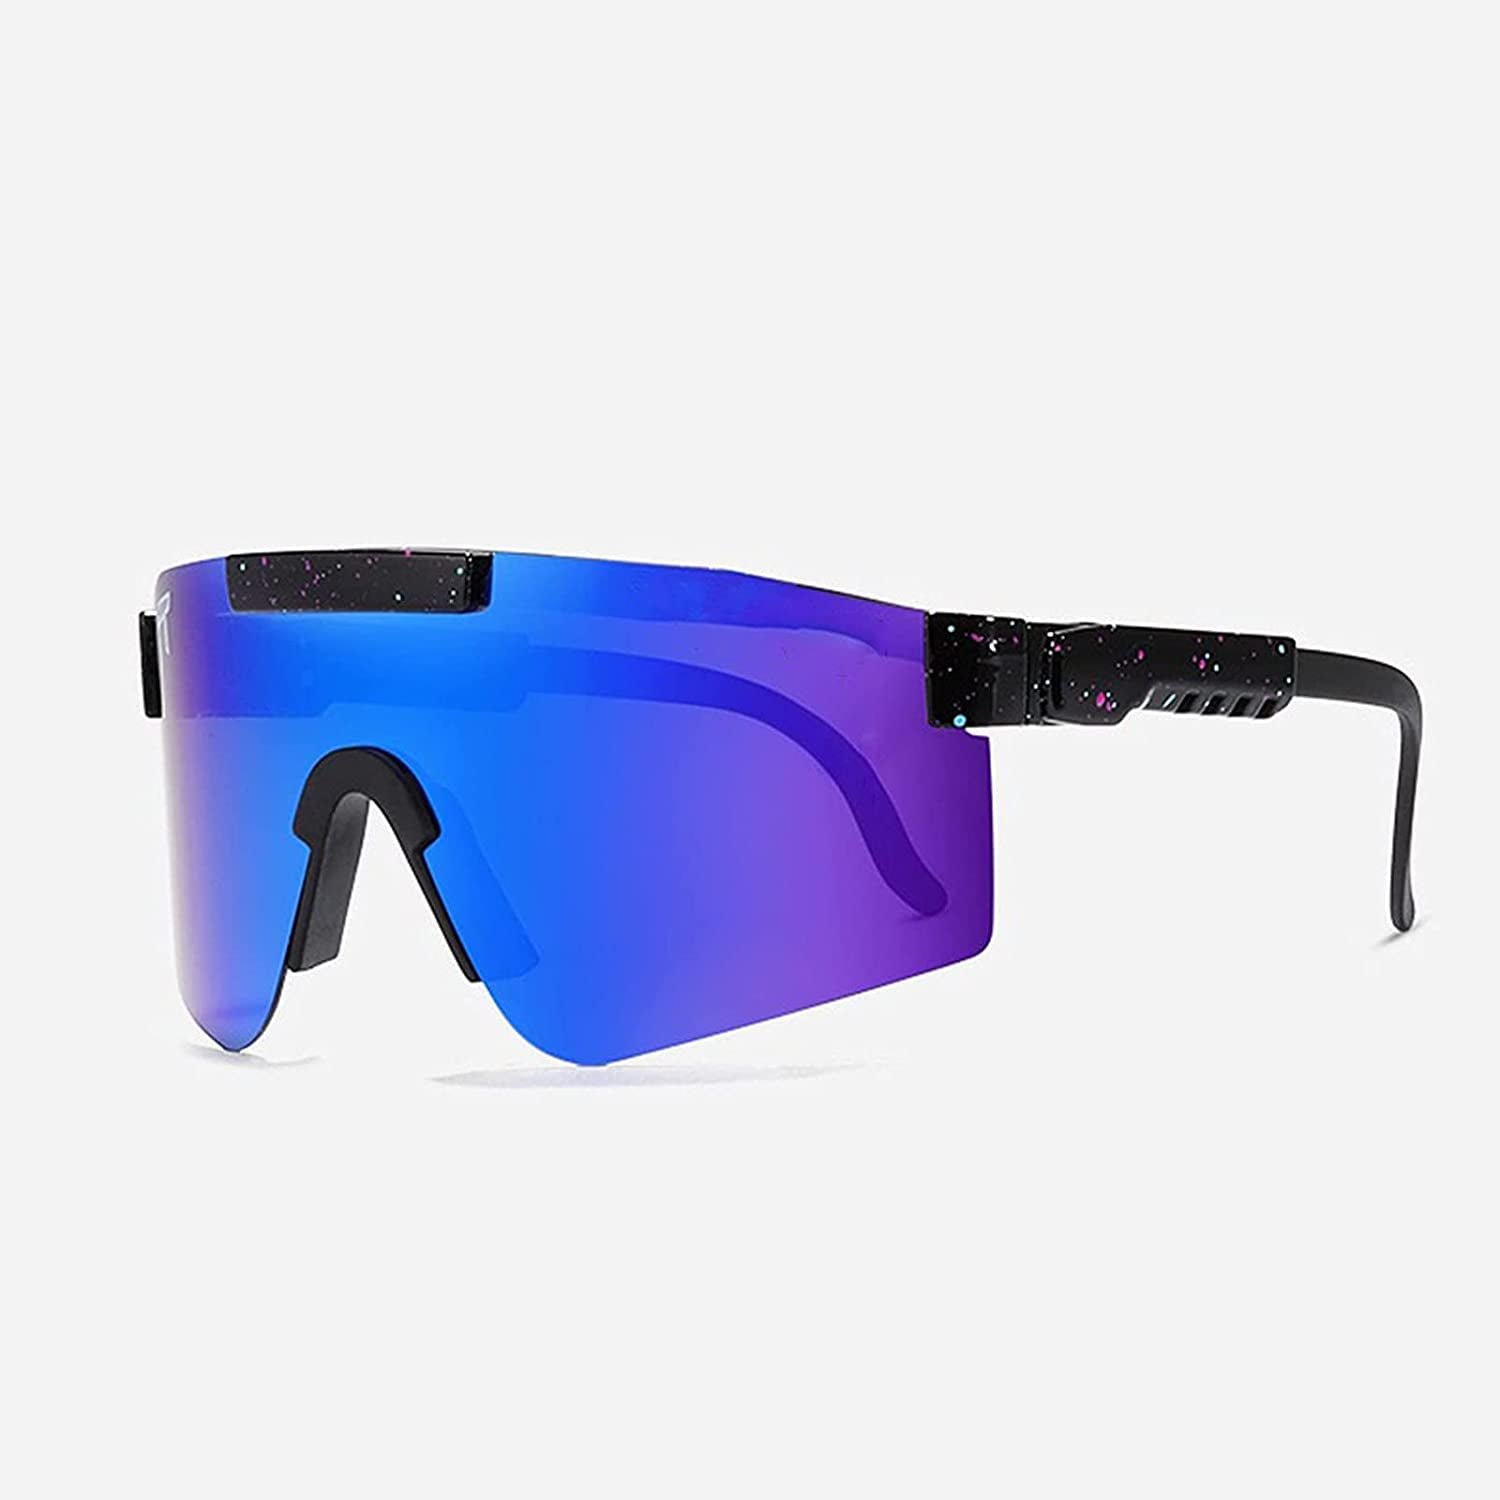 Sports Polarized Sunglasses,Outdoor Sports Windproof UV400 Eyewear,Ideal for Cycling Running Fishing and Outdoor Activities 